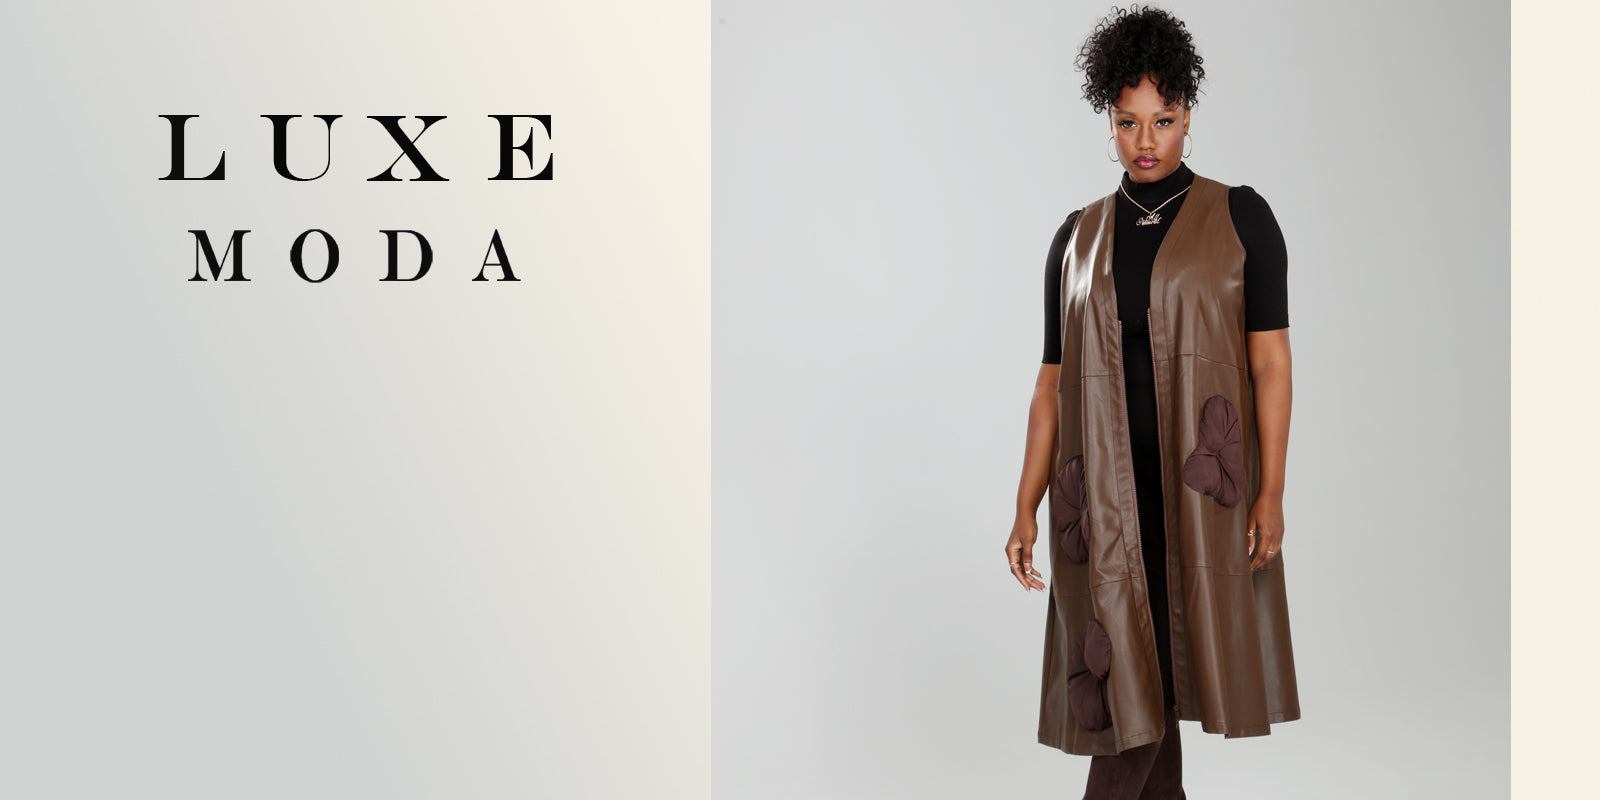 Moda Luxe wholesale products